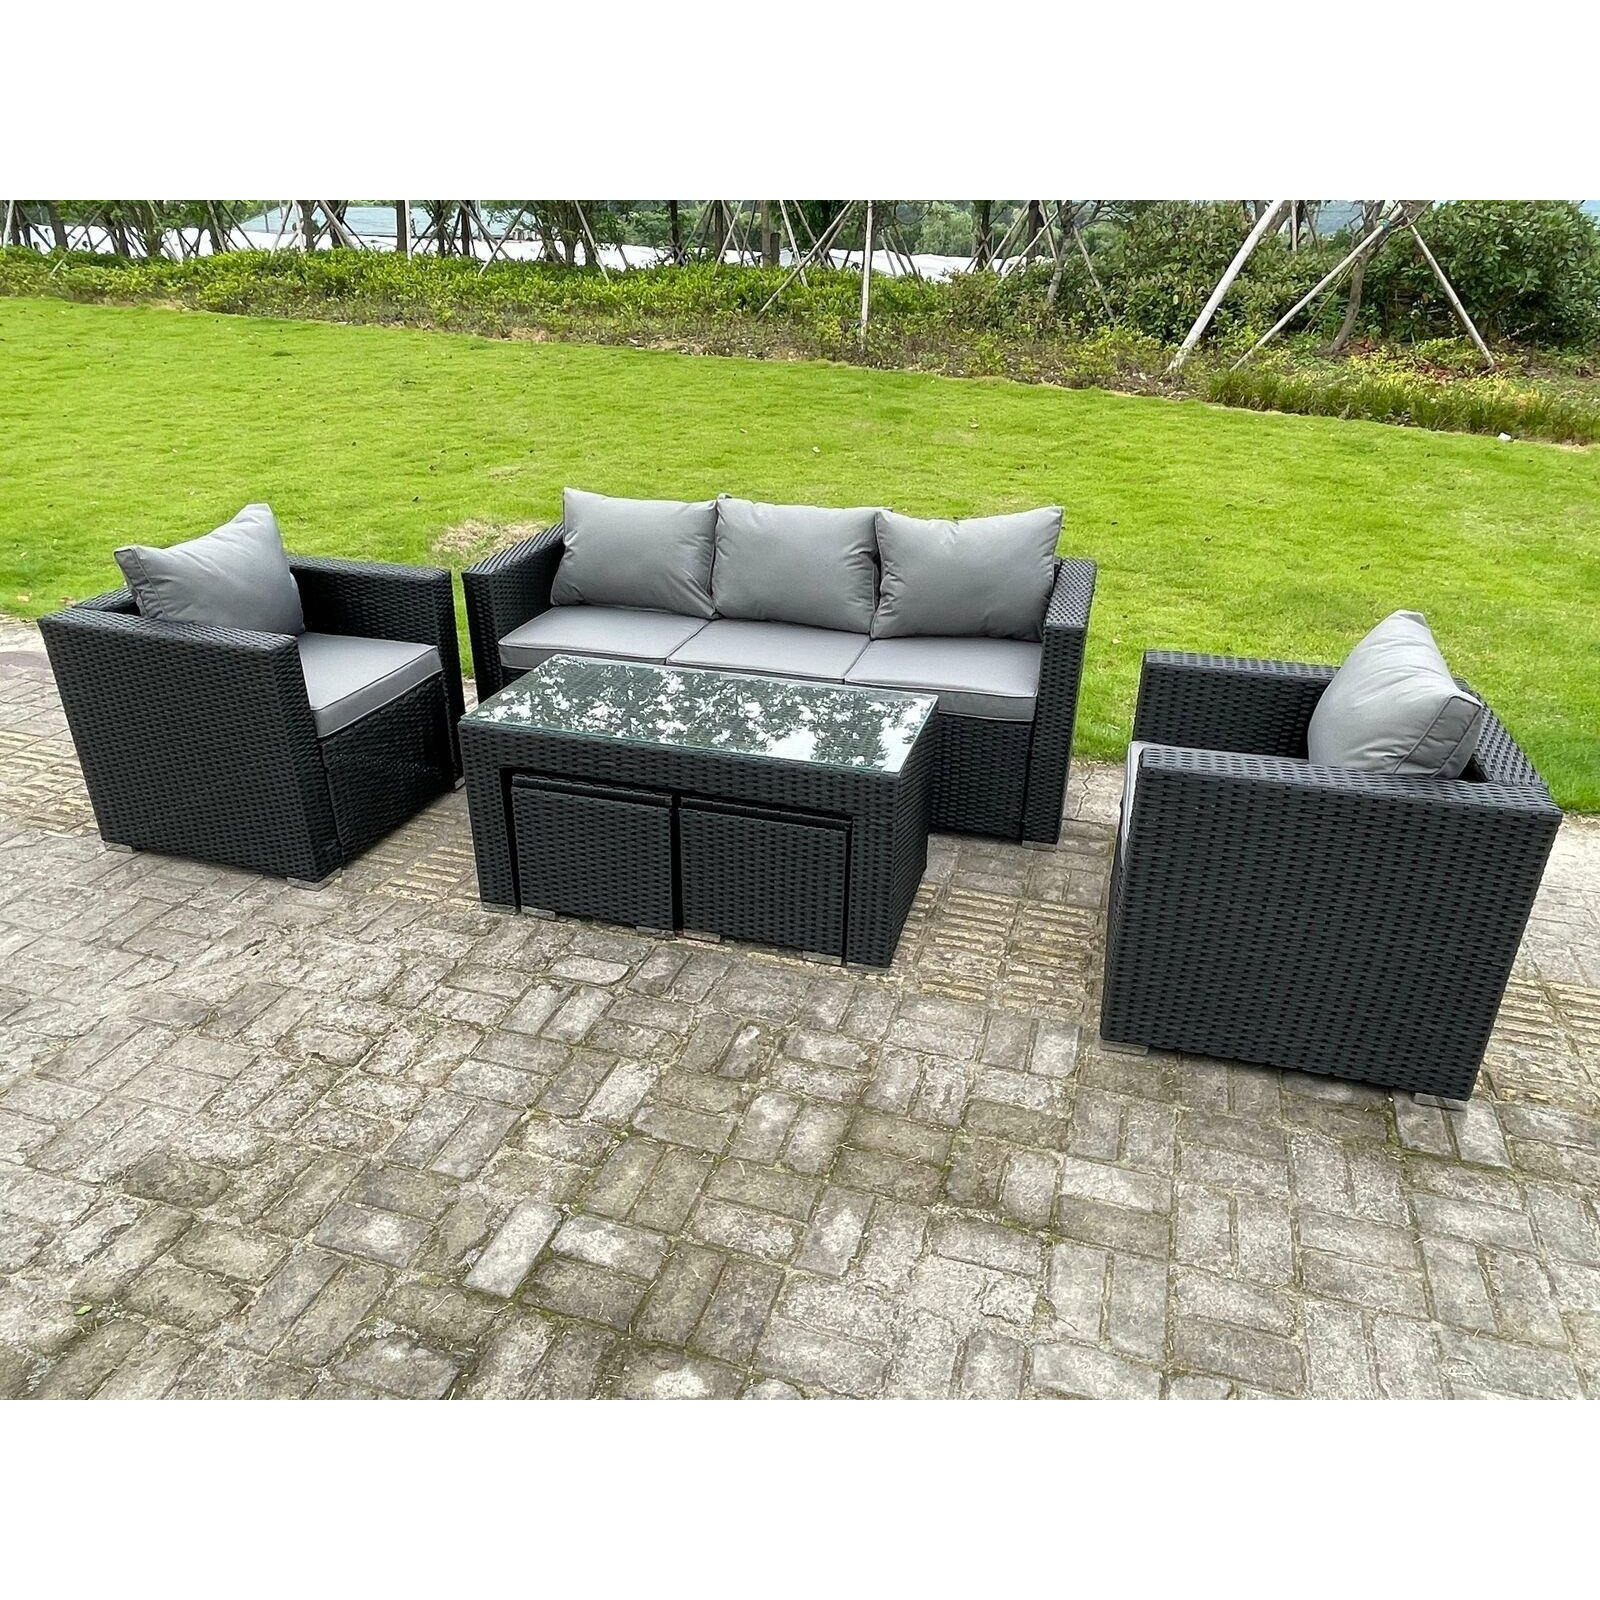 Wicker Rattan Garden Furniture Sofa Sets Outdoor Patio Coffee Table With Stools Black - image 1